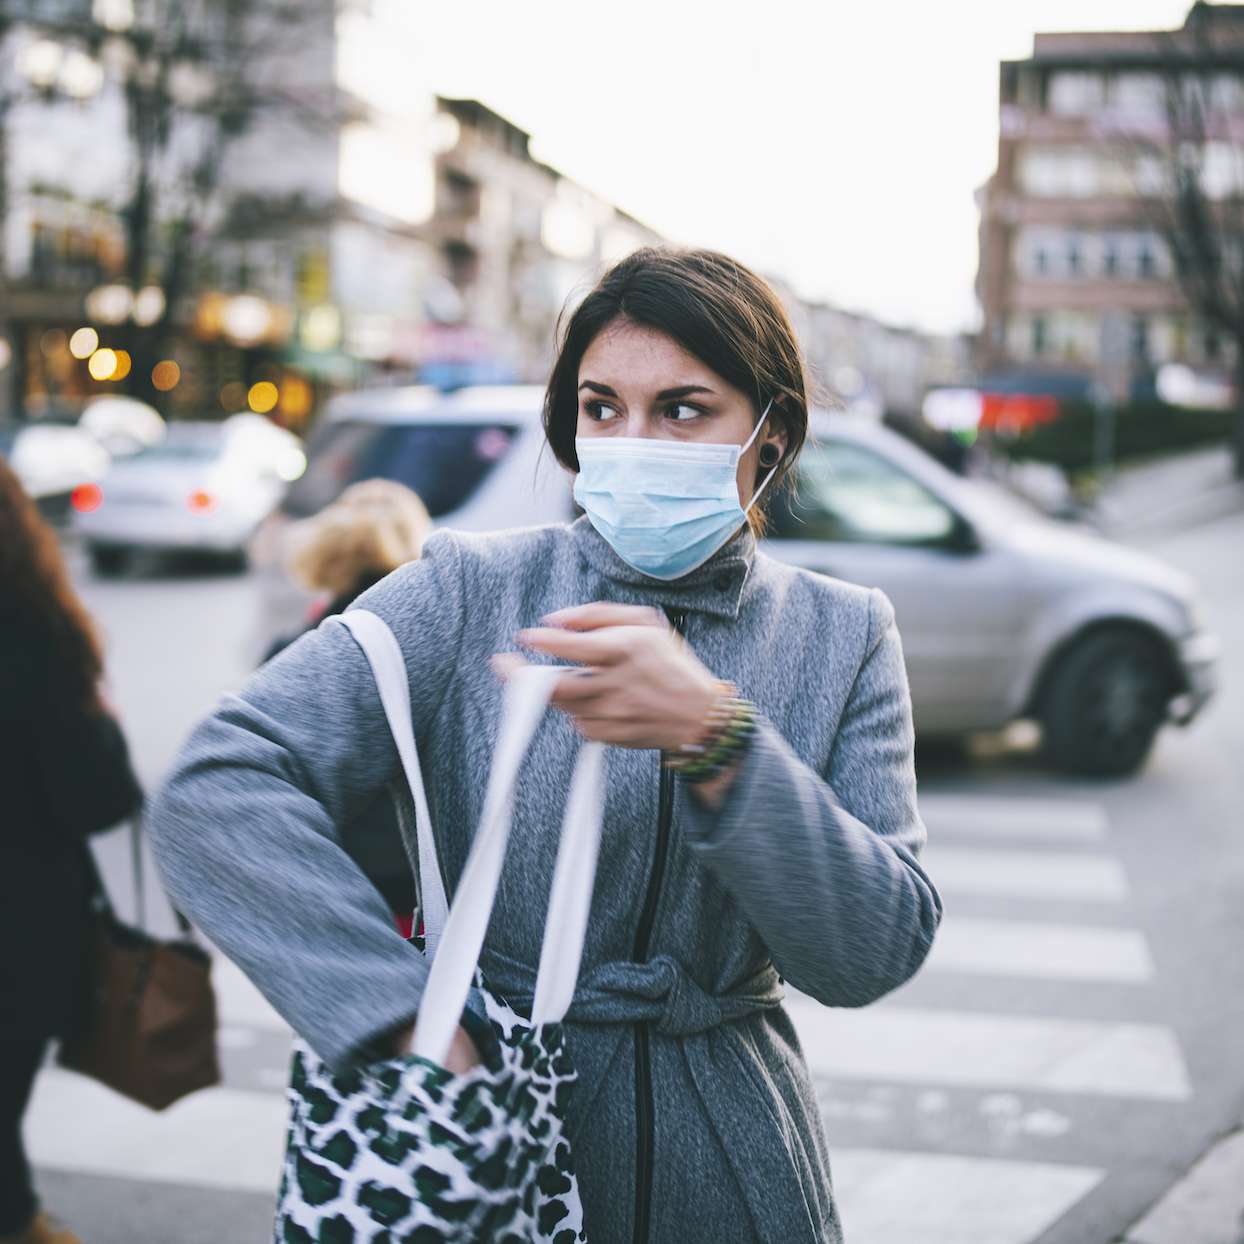 Young Woman Walking On The Street With Protective Face Mask.